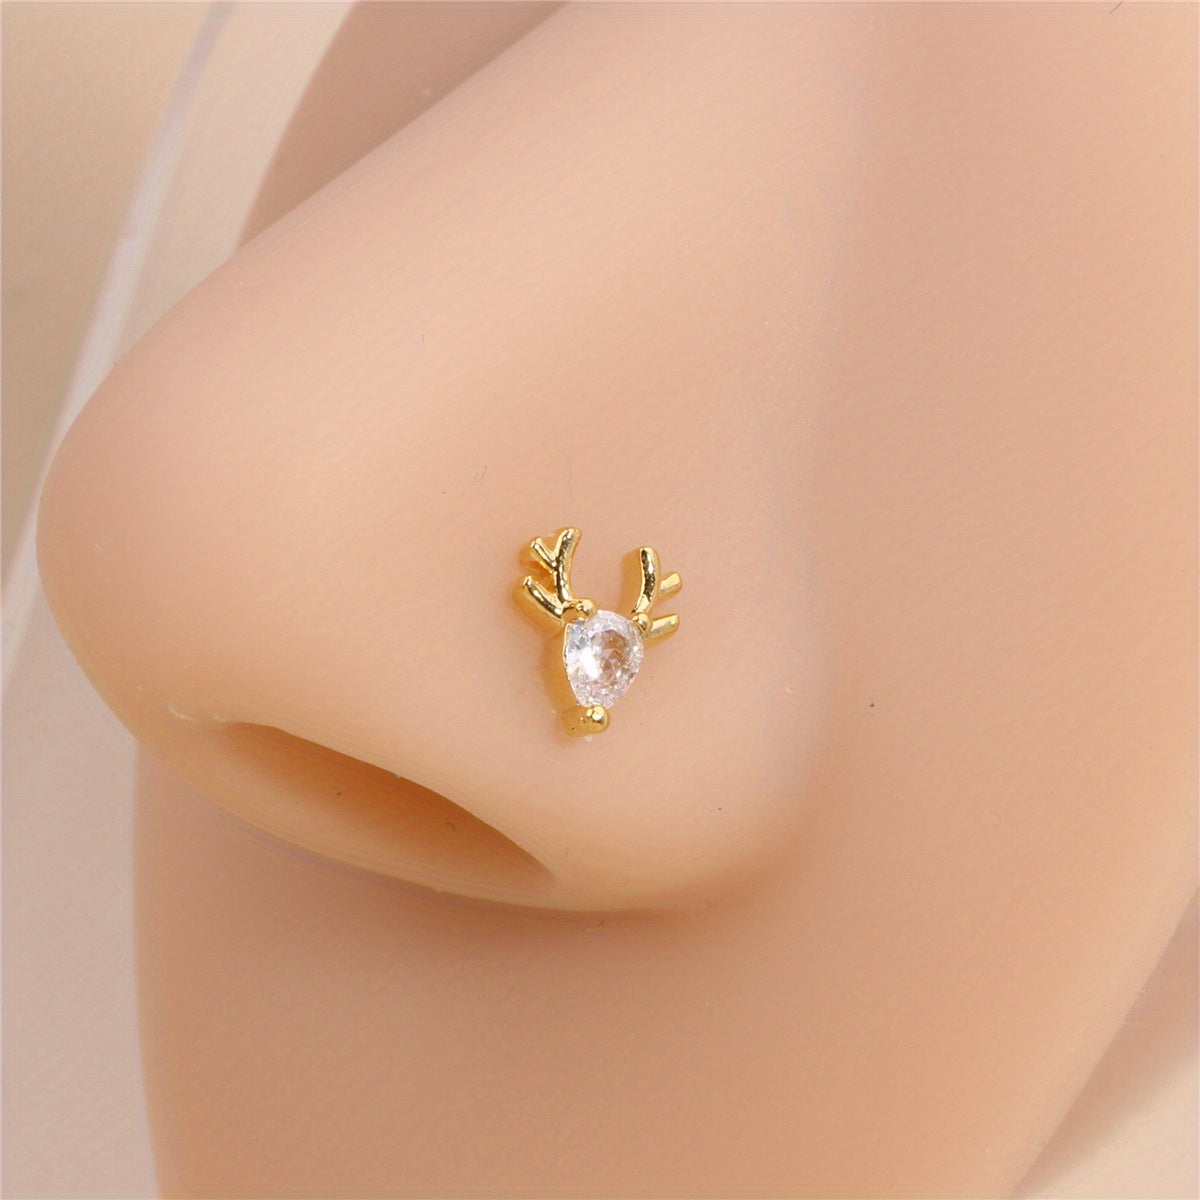 1Pcs Elk Shape Nose Ring Inlaid Cubic Zirconia L Shaped Nose Ring Stud For Women Festival Gift Body Piercing Jewelry